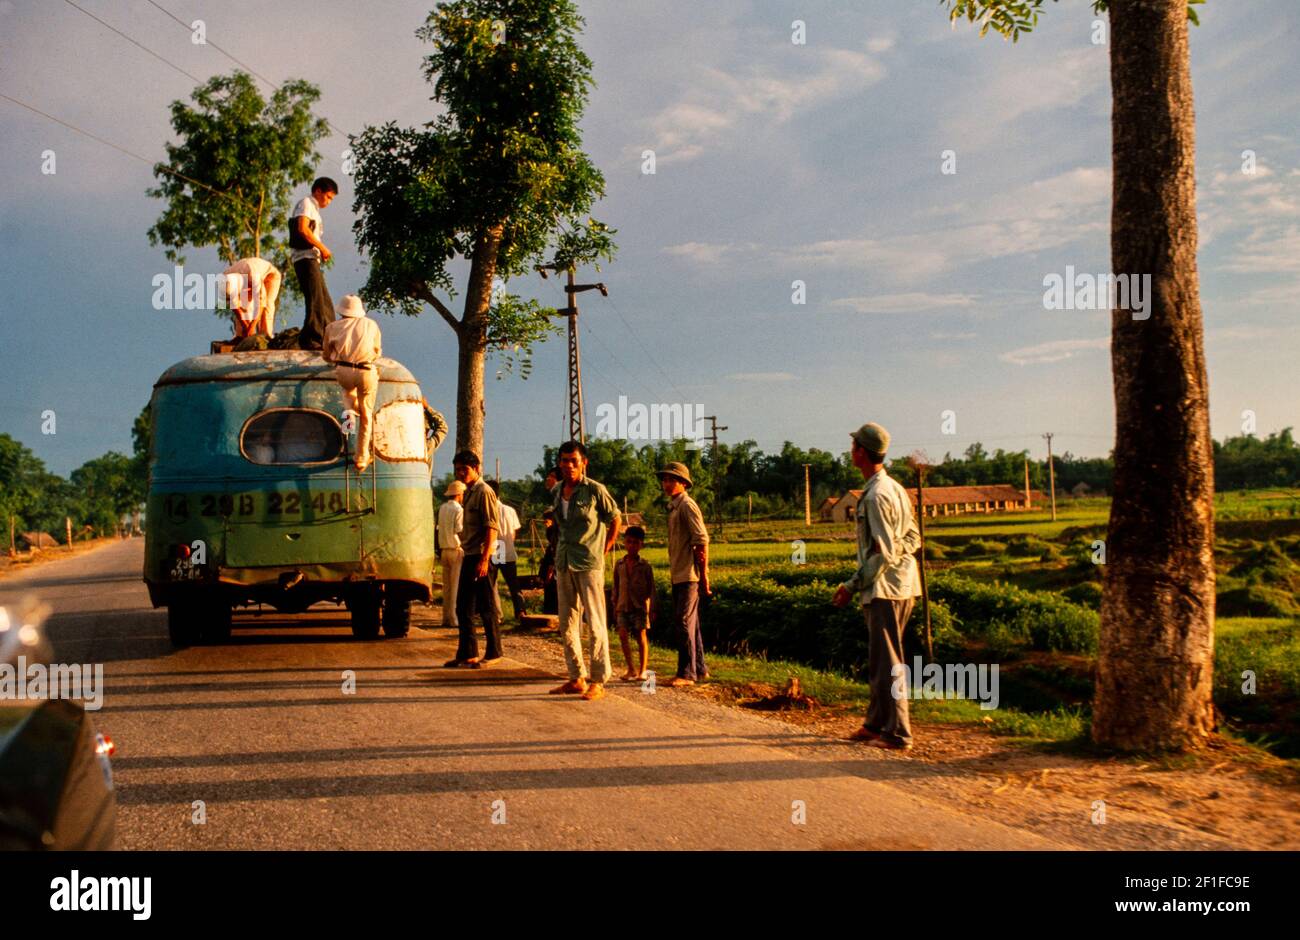 Police checking a bus, on a rural road, North Vietnam, June 1980 Stock Photo